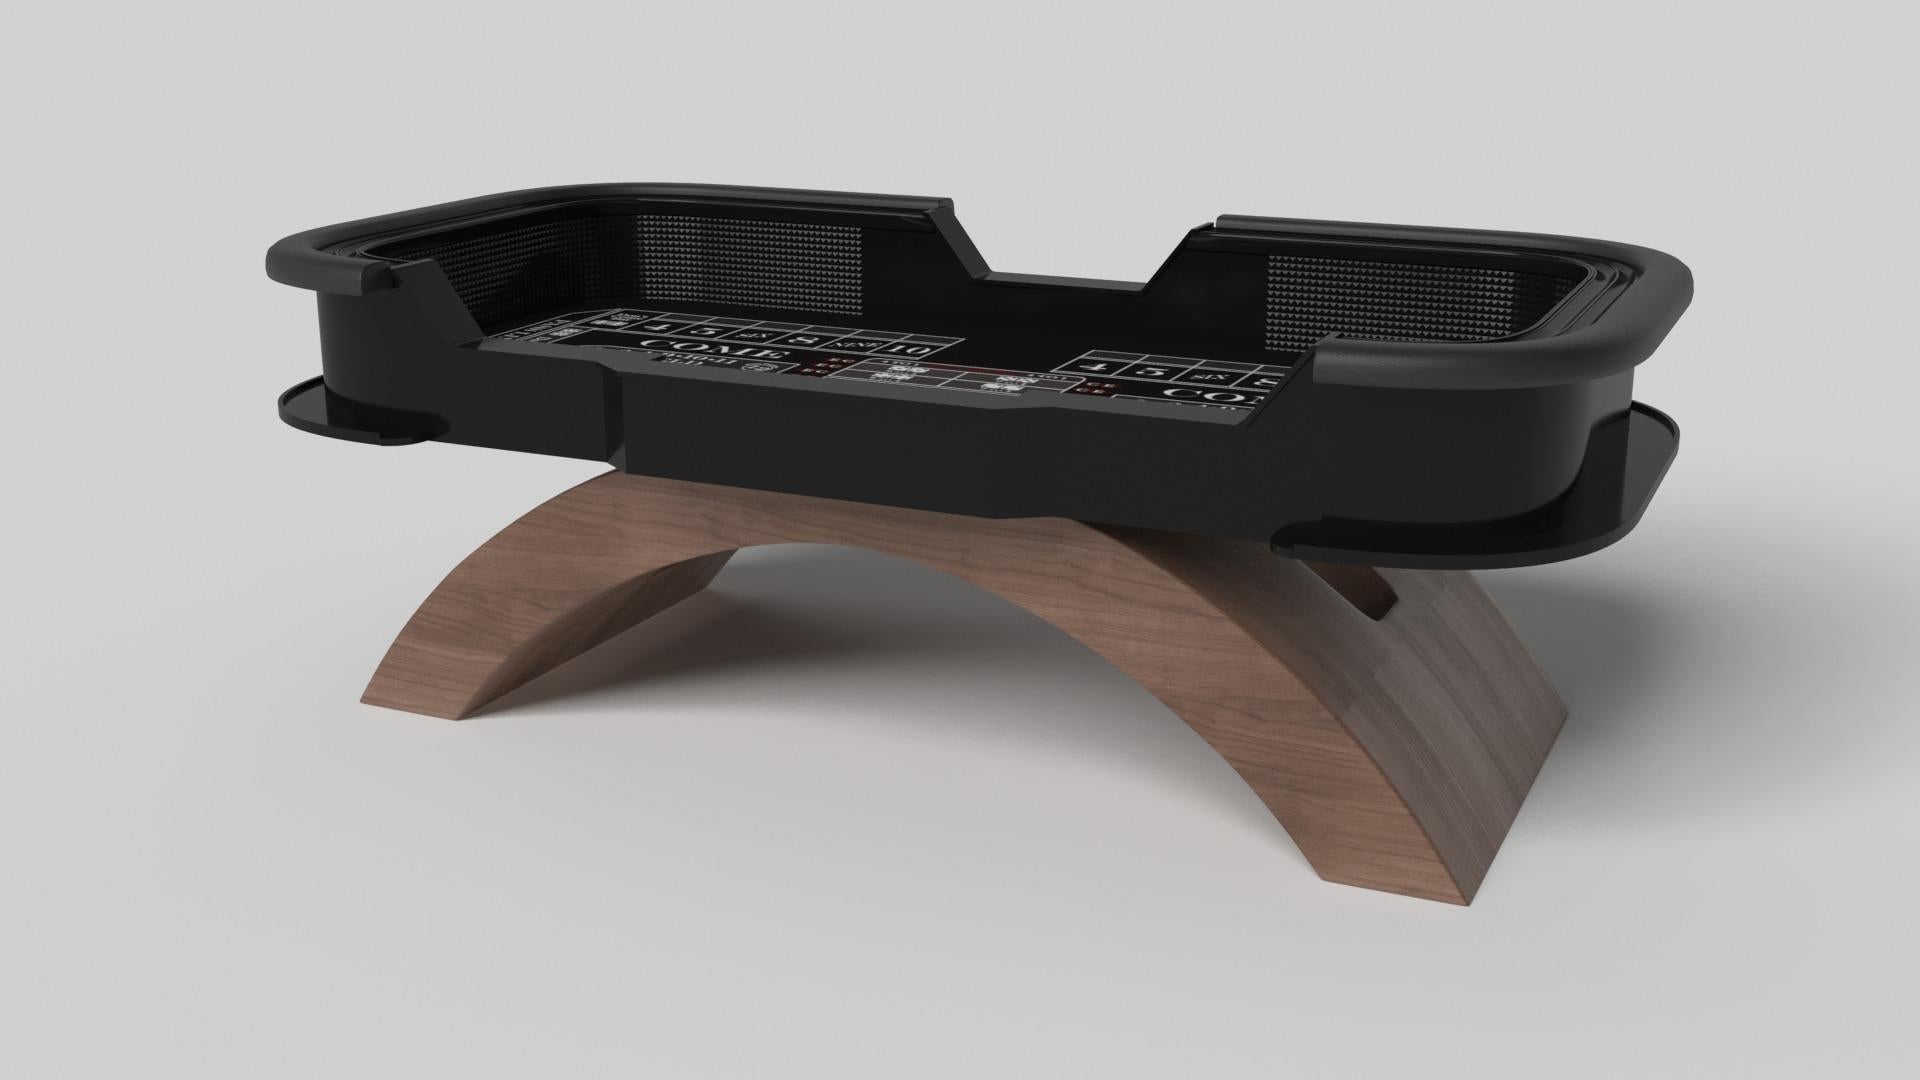 An open, arched base balances beautifully against the hard edges of the rectangular surface top, making the Zenith craps table in black with red a striking juxtaposition of modern, geometric forms. Minimalist in its appeal yet luxurious in design,